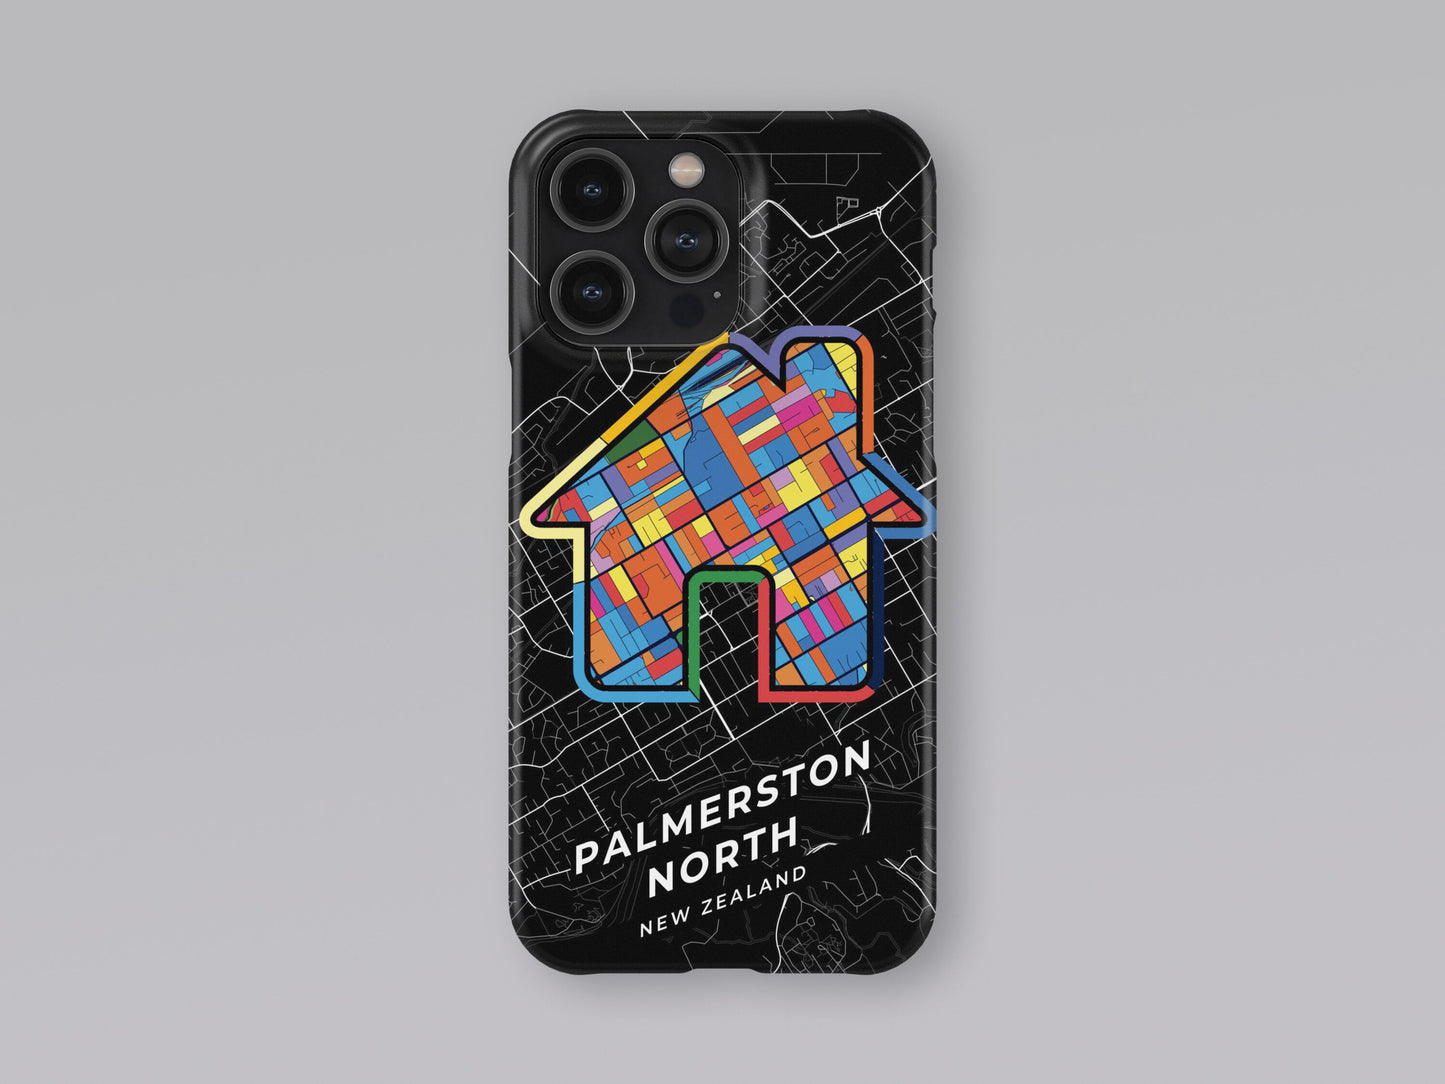 Palmerston North New Zealand slim phone case with colorful icon 3